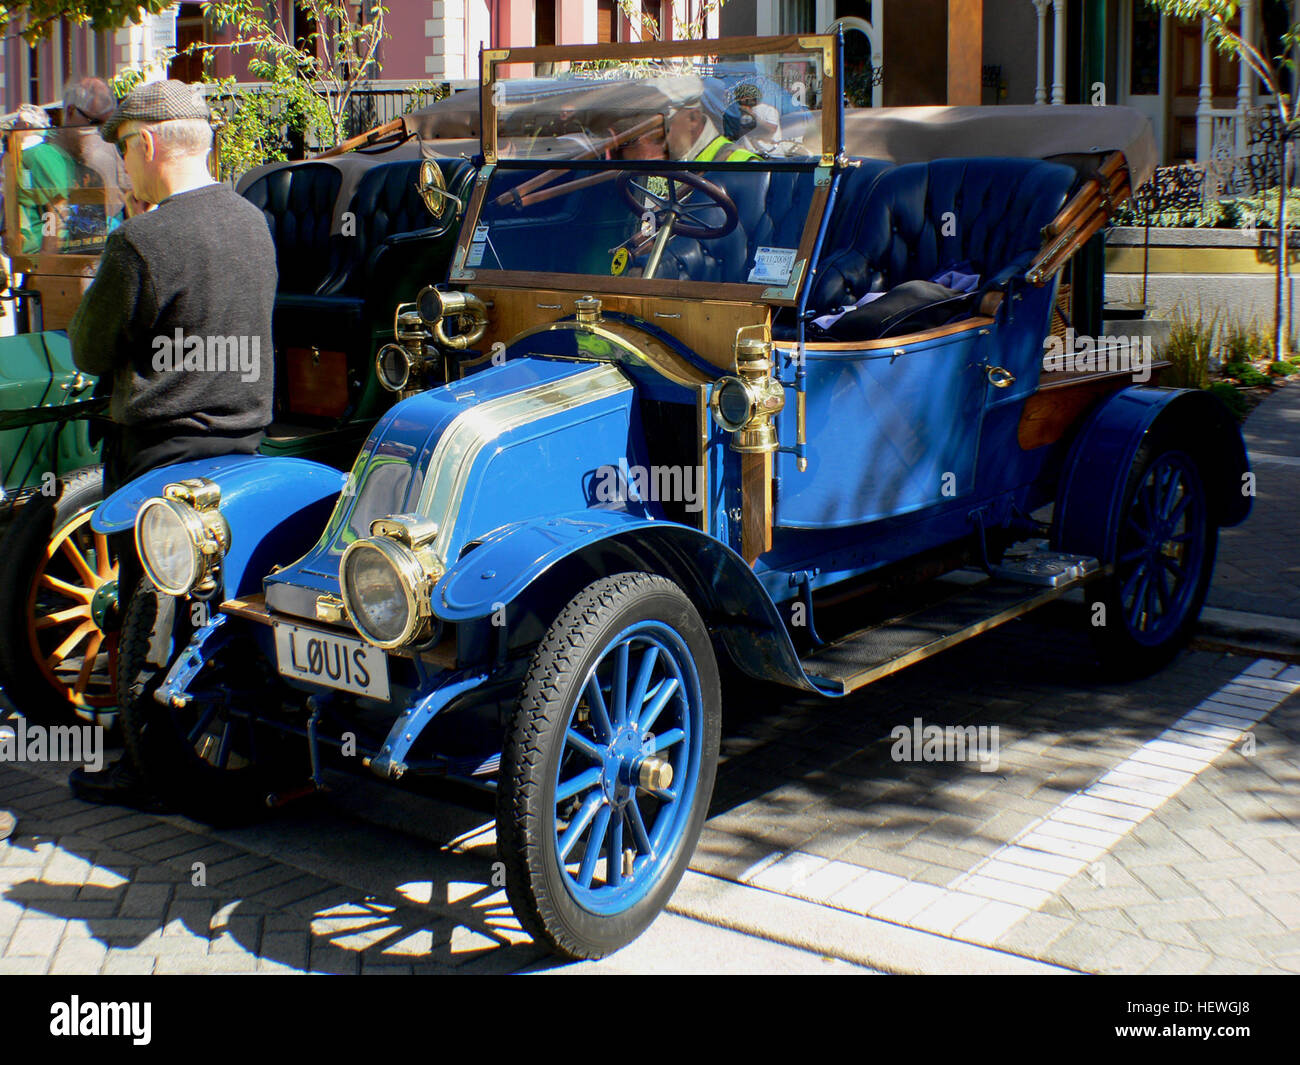 ManufacturerRenault Production1912 DesignerLouis Renault Body and chassis ClassLuxury-class car Body style4-door sedan LayoutFR layout Powertrain Engine7539 cc straight-6, 35hp Stock Photo